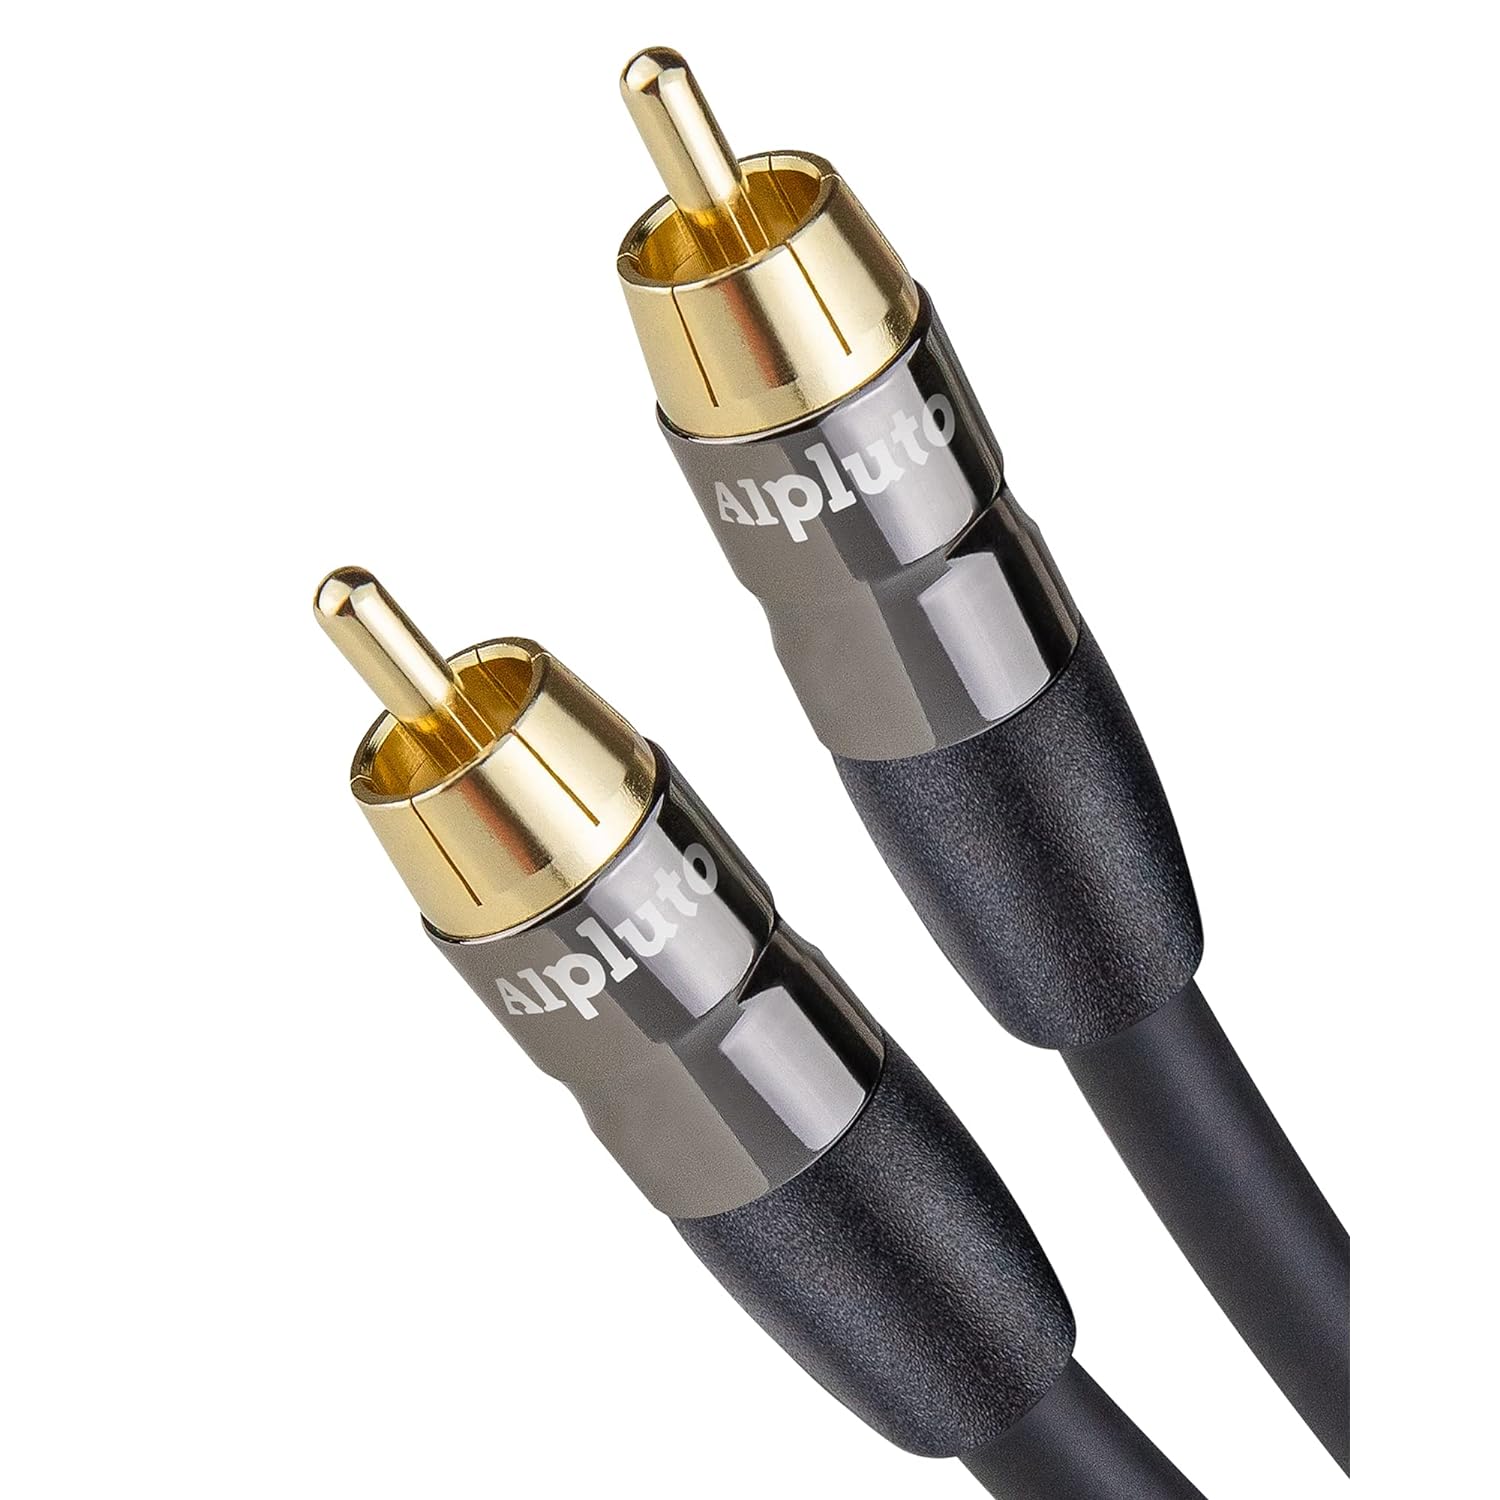 Great Choice Products Subwoofer Cable, Rca To Rca Audio Cable,Subwoofer Cable Dual Shielded With Gold Plated Rca To Rca Connectors-Black (20Ft)